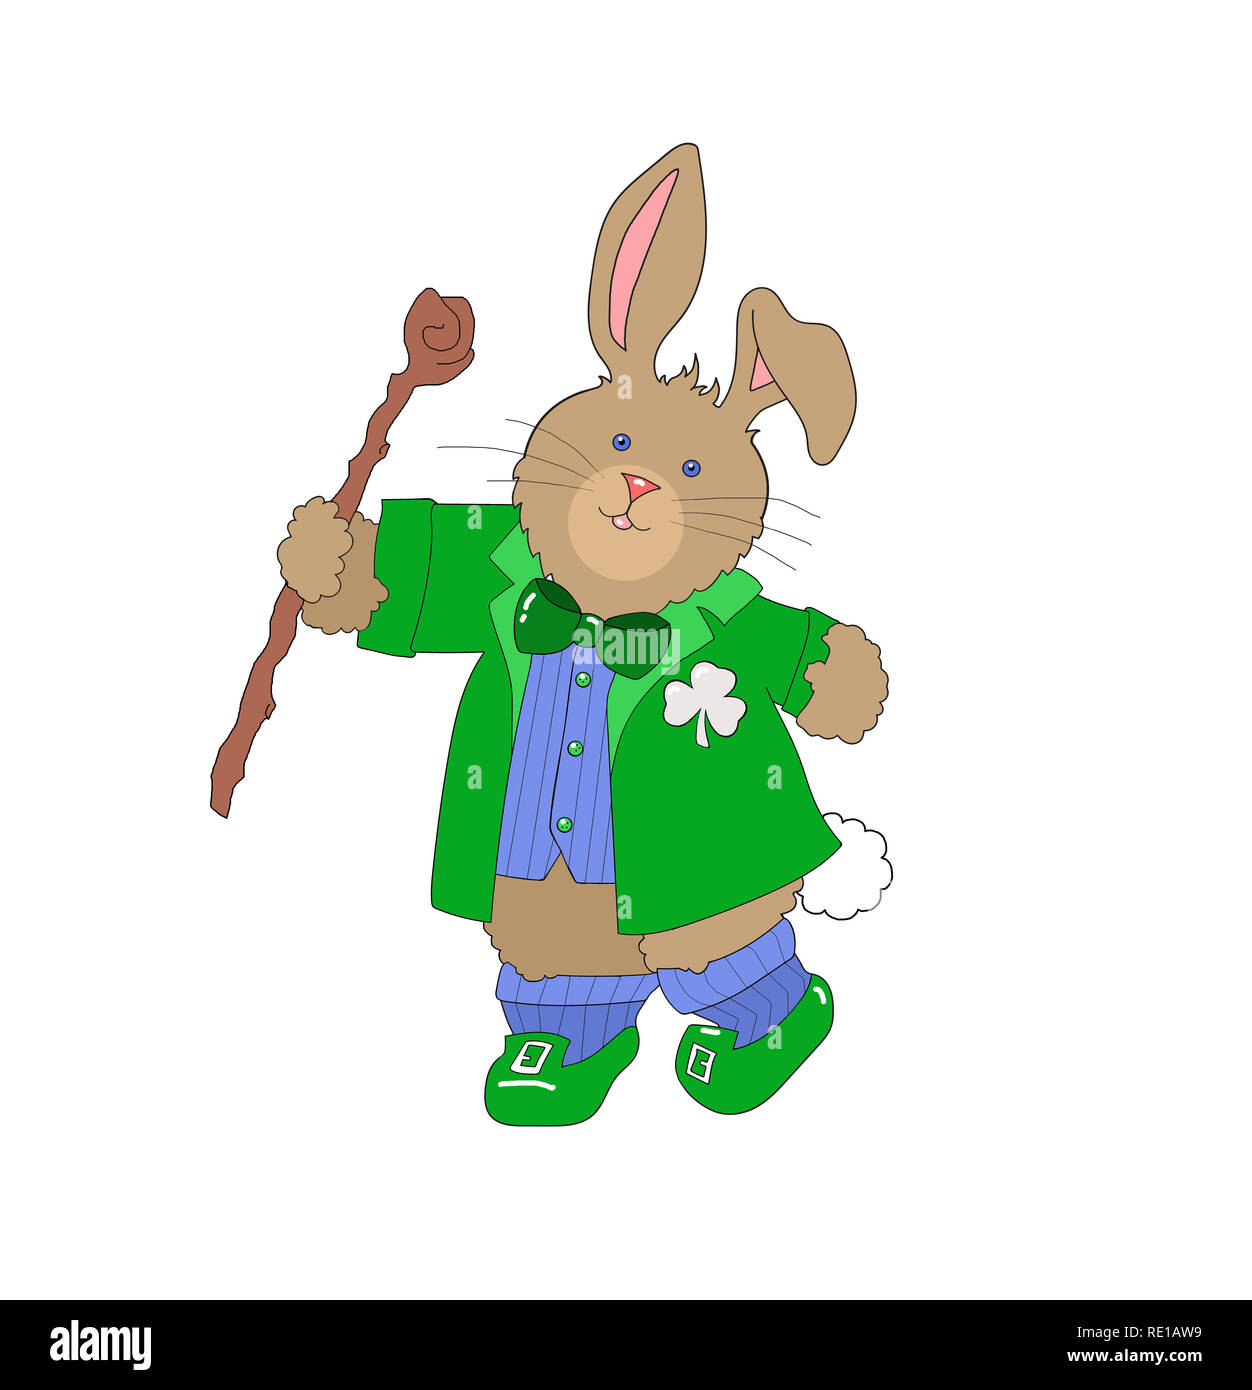 Clip art illustration of a cute rabbit/bunny dressed as a leprechaun and dancing on a white background. Stock Photo